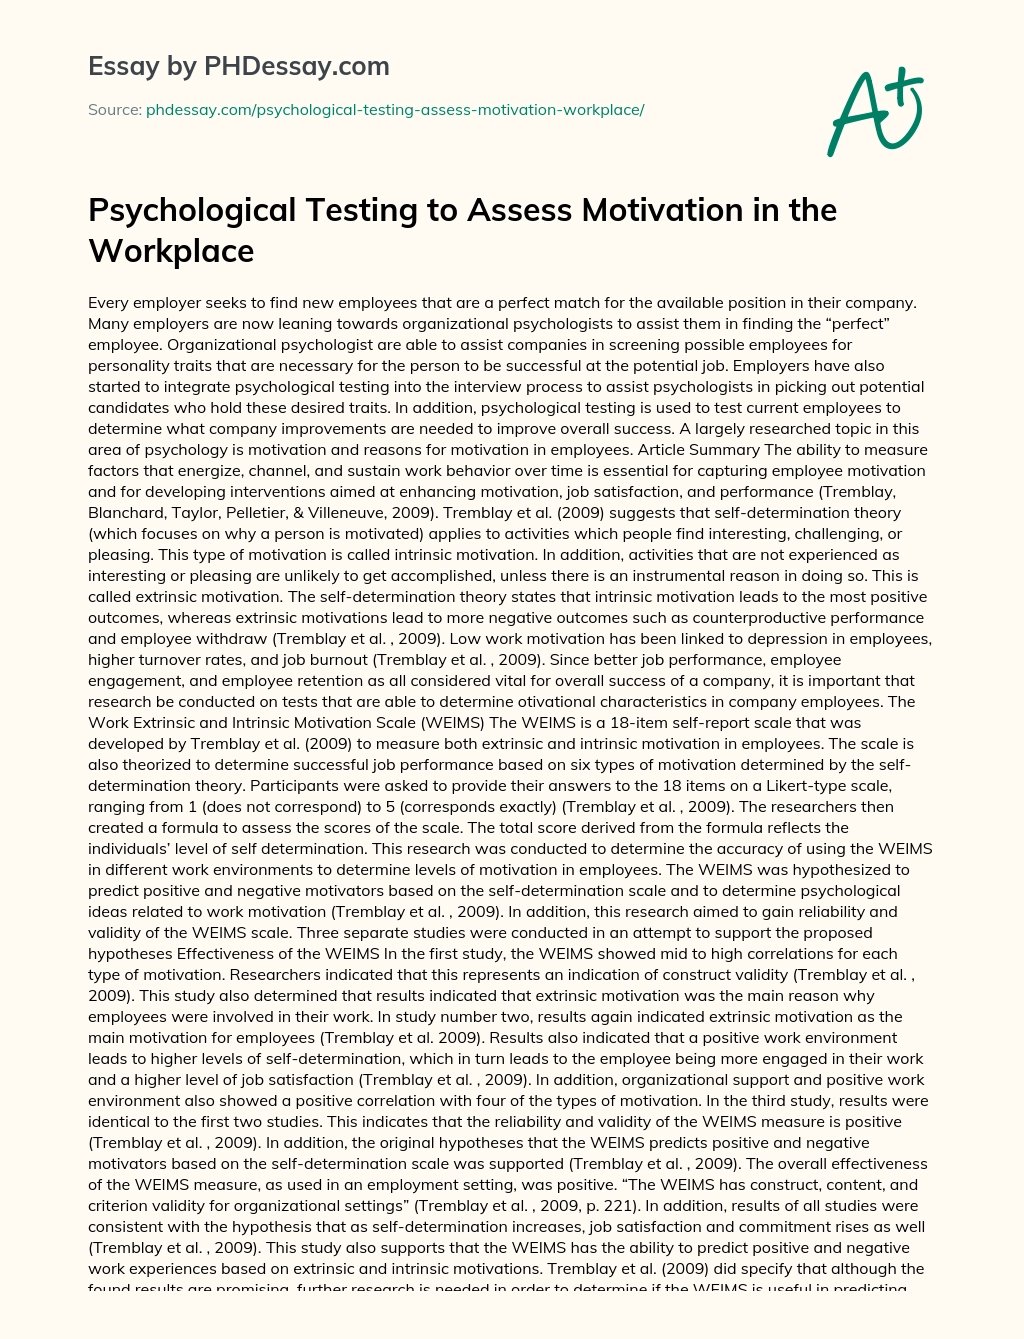 Psychological Testing to Assess Motivation in the Workplace essay